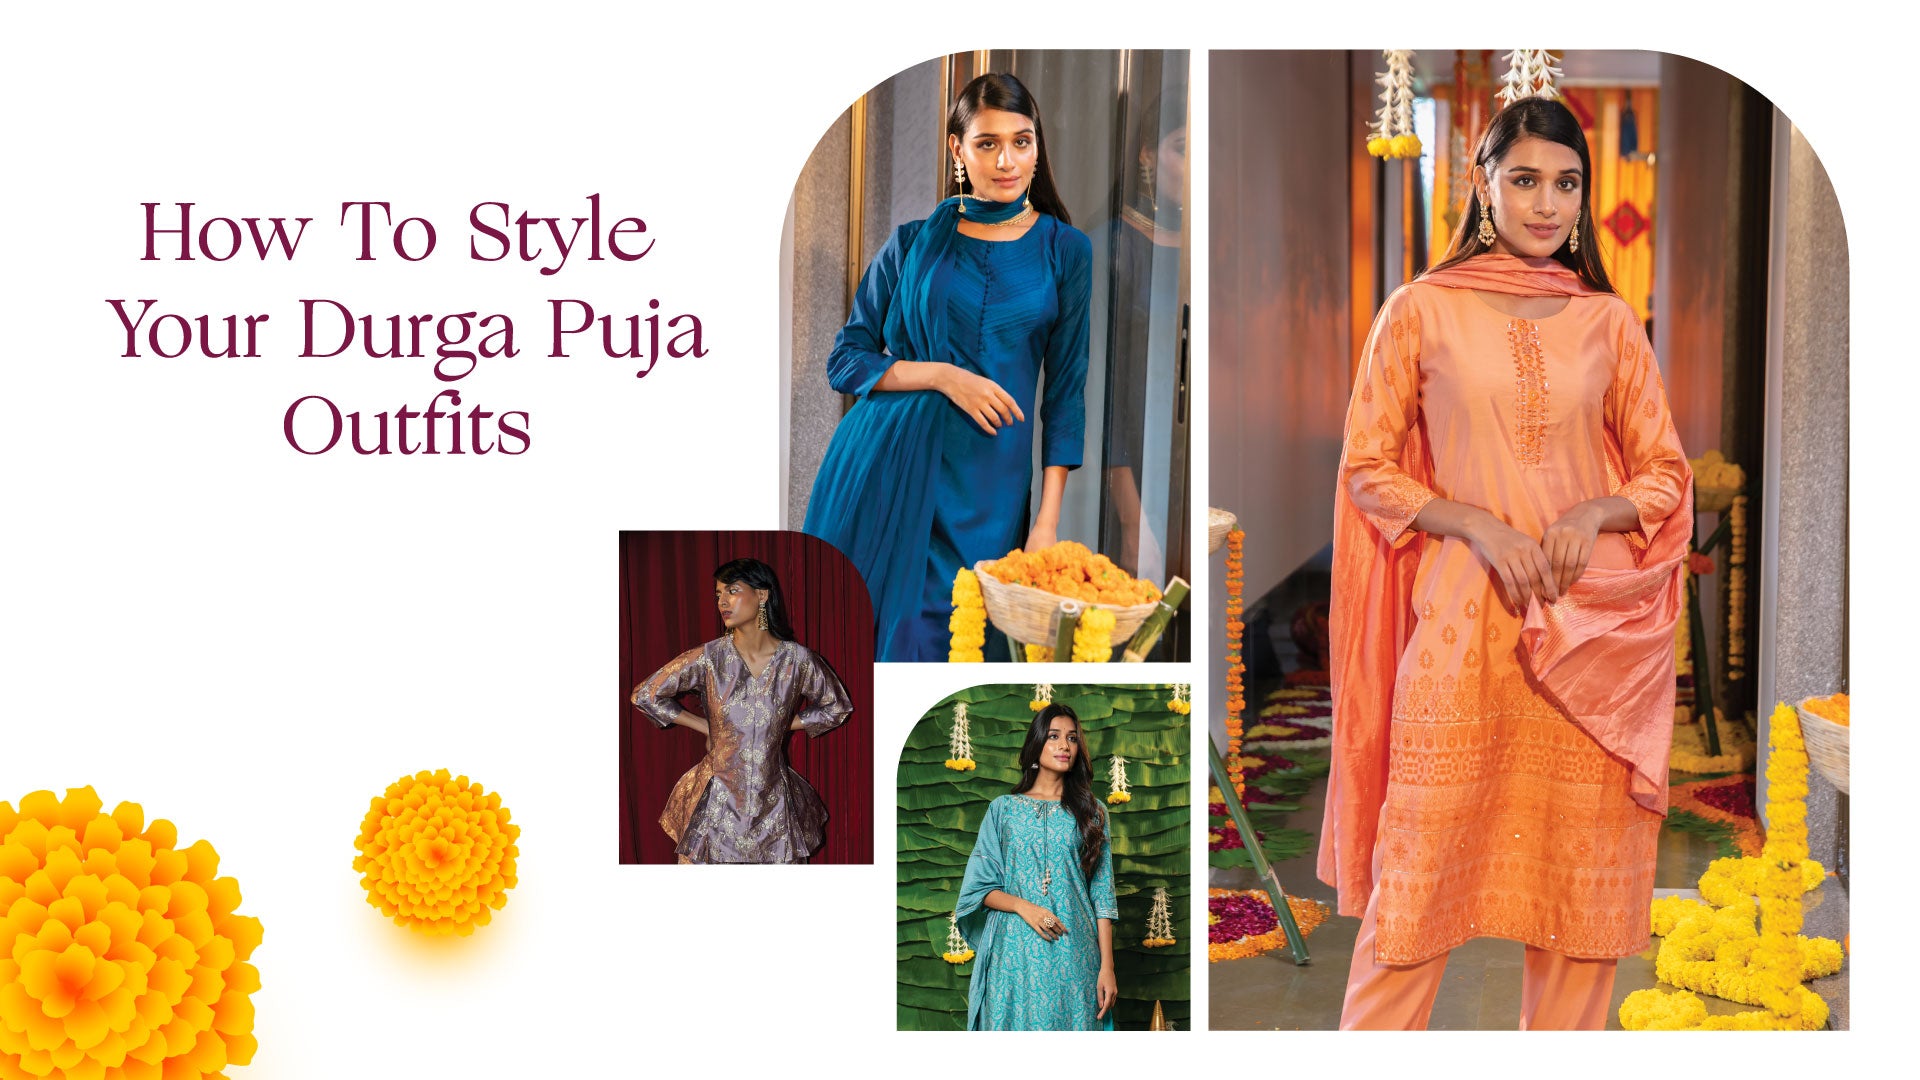 How To Style Your Durga Puja Outfits?